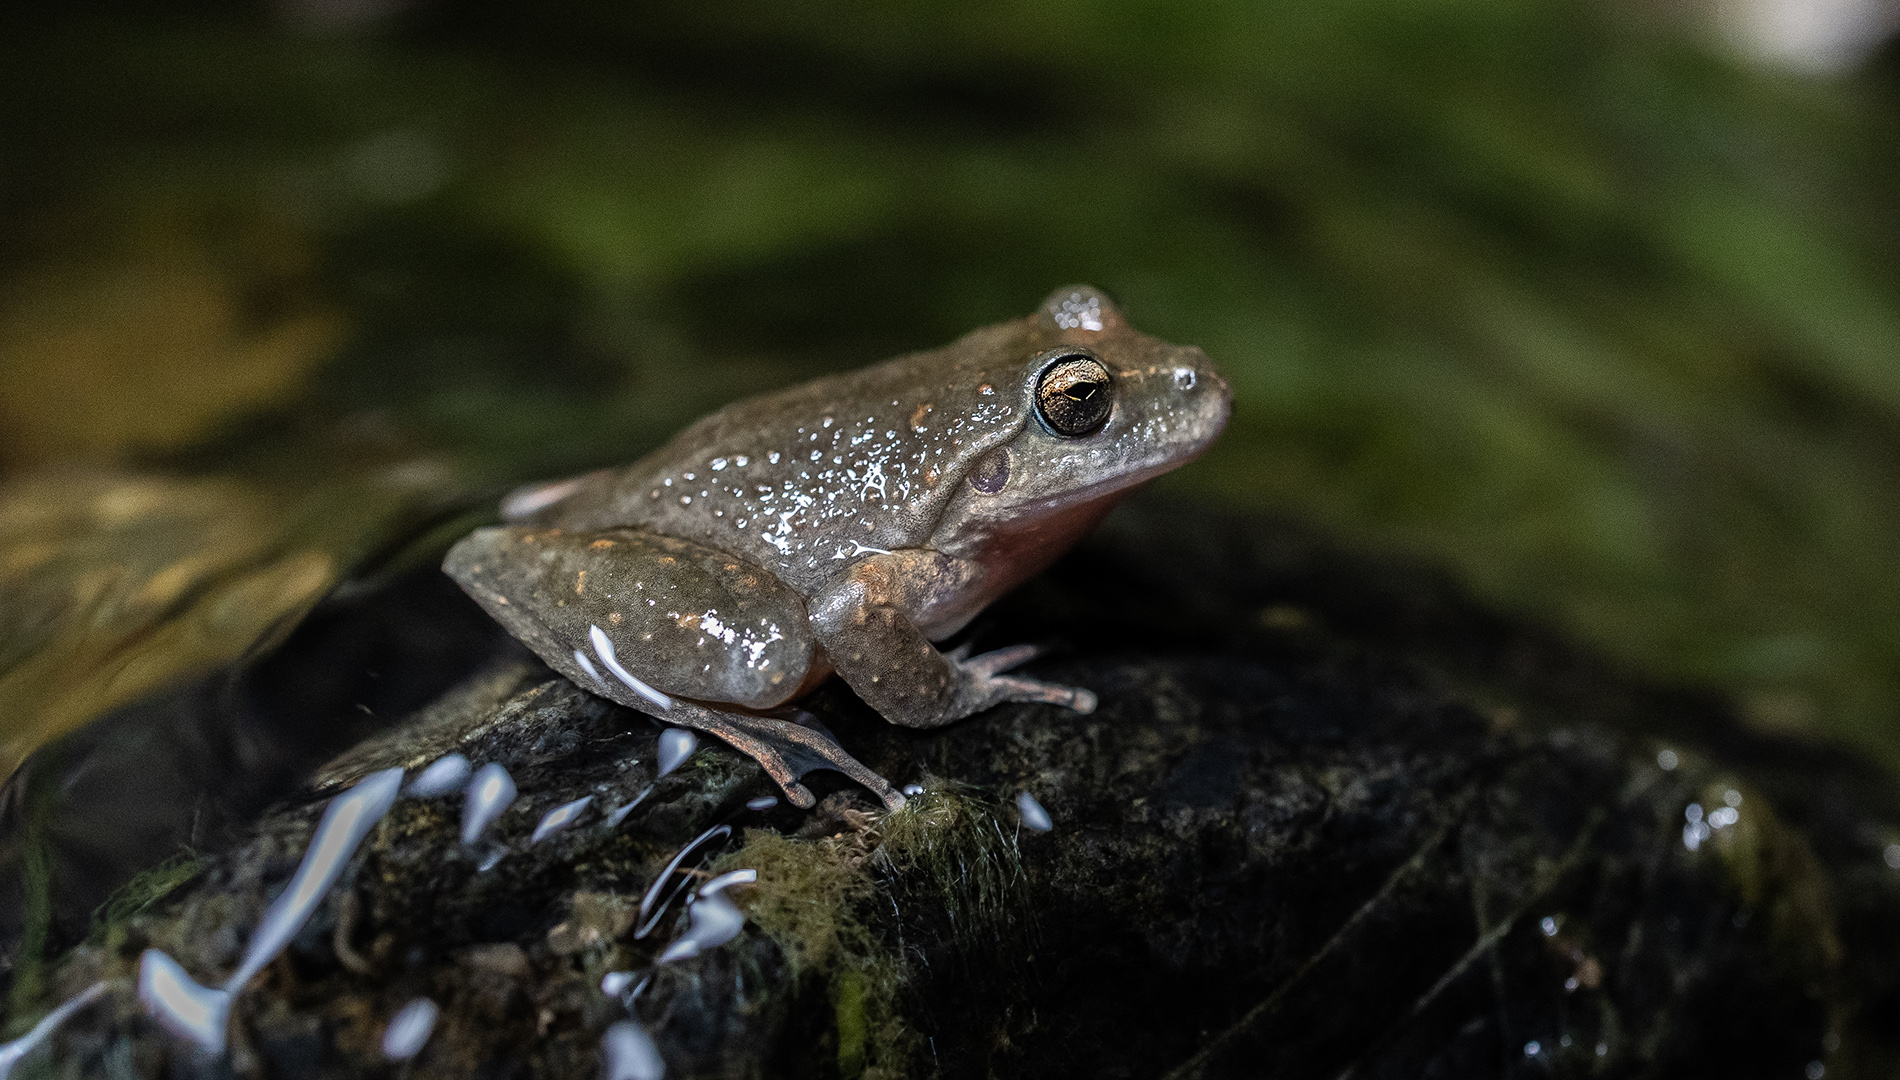 Endangered Booroolong frog (Litoria booroolongensis) sitting in a flowing stream habitat. Image credit: Alex Pike - Department of Planning and Environment.